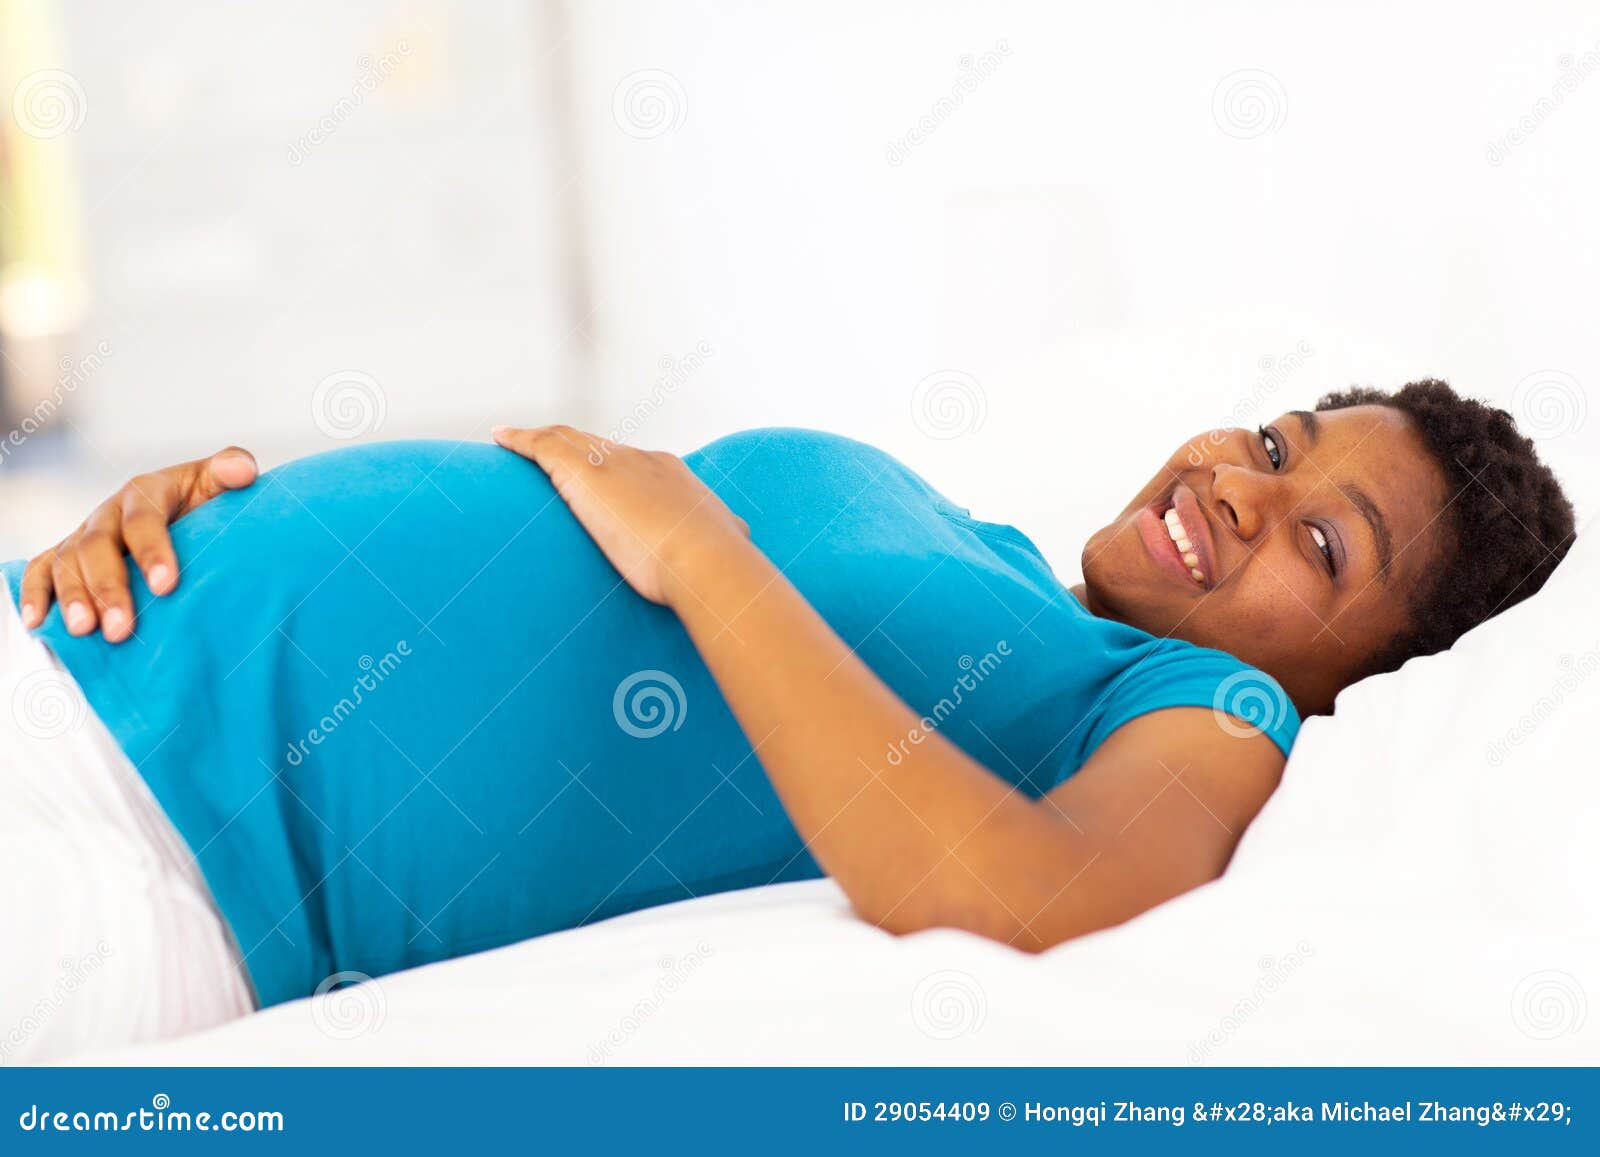 Pregnant Woman Bed Stock Image Image Of Happy Beautiful 29054409